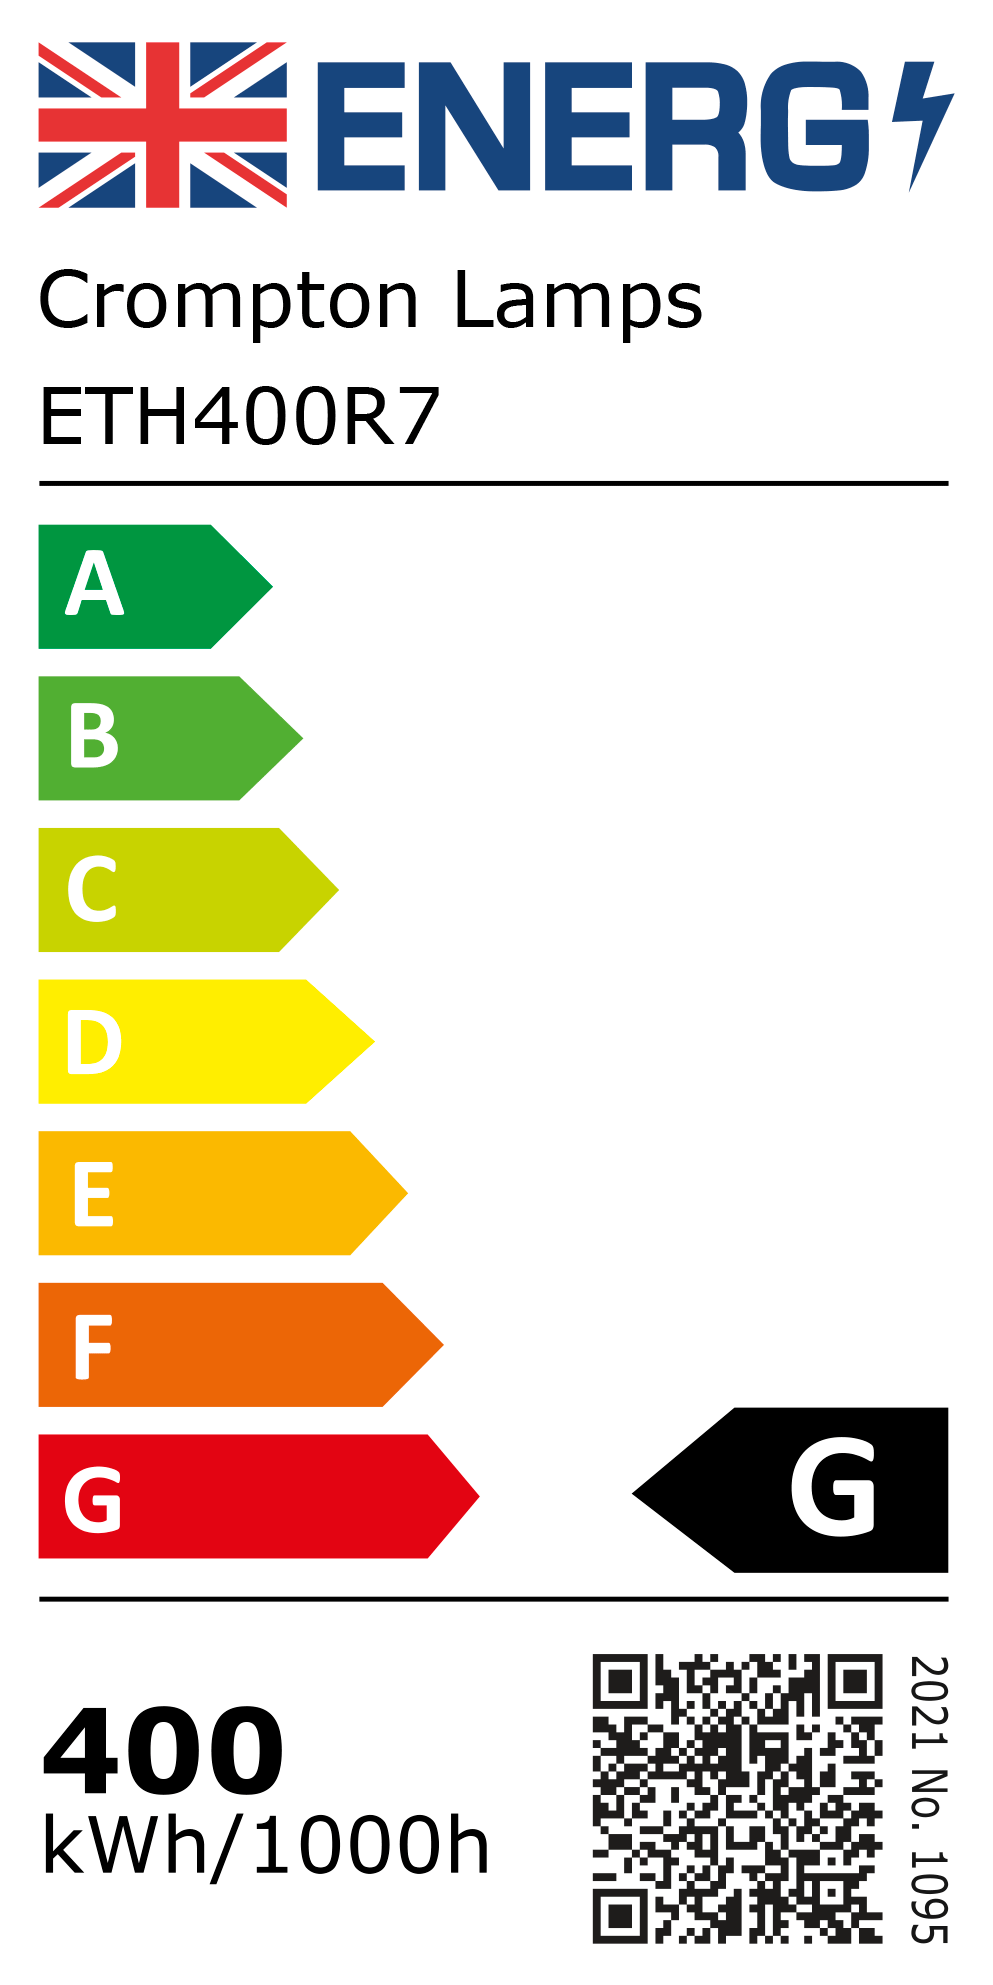 New 2021 Energy Rating Label: Stock Code ETH400R7